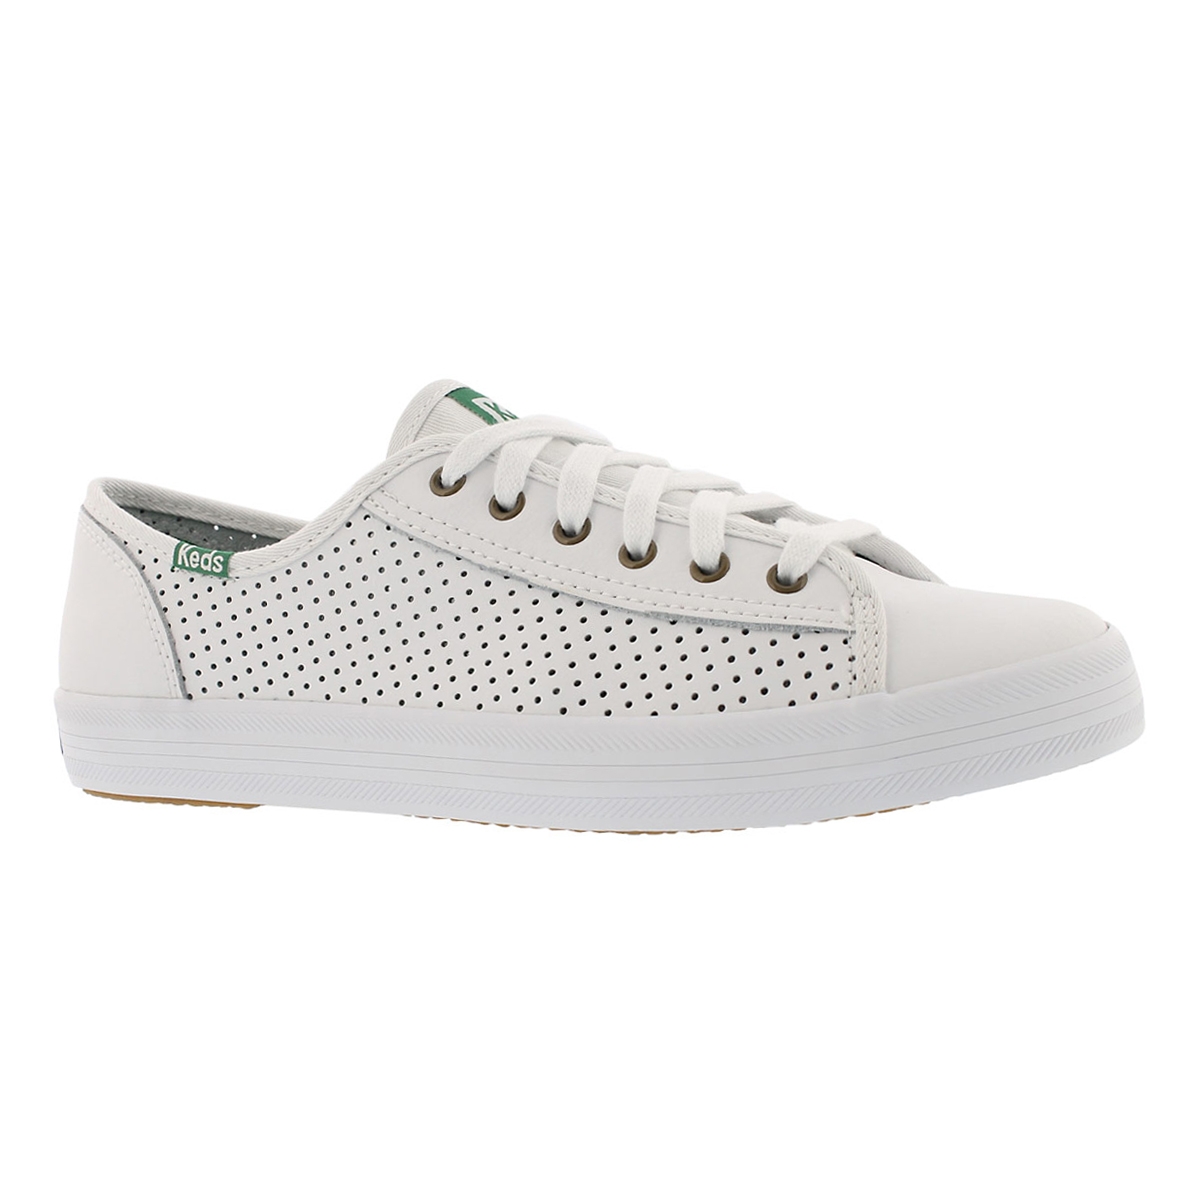 keds kickstart perforated leather sneakers